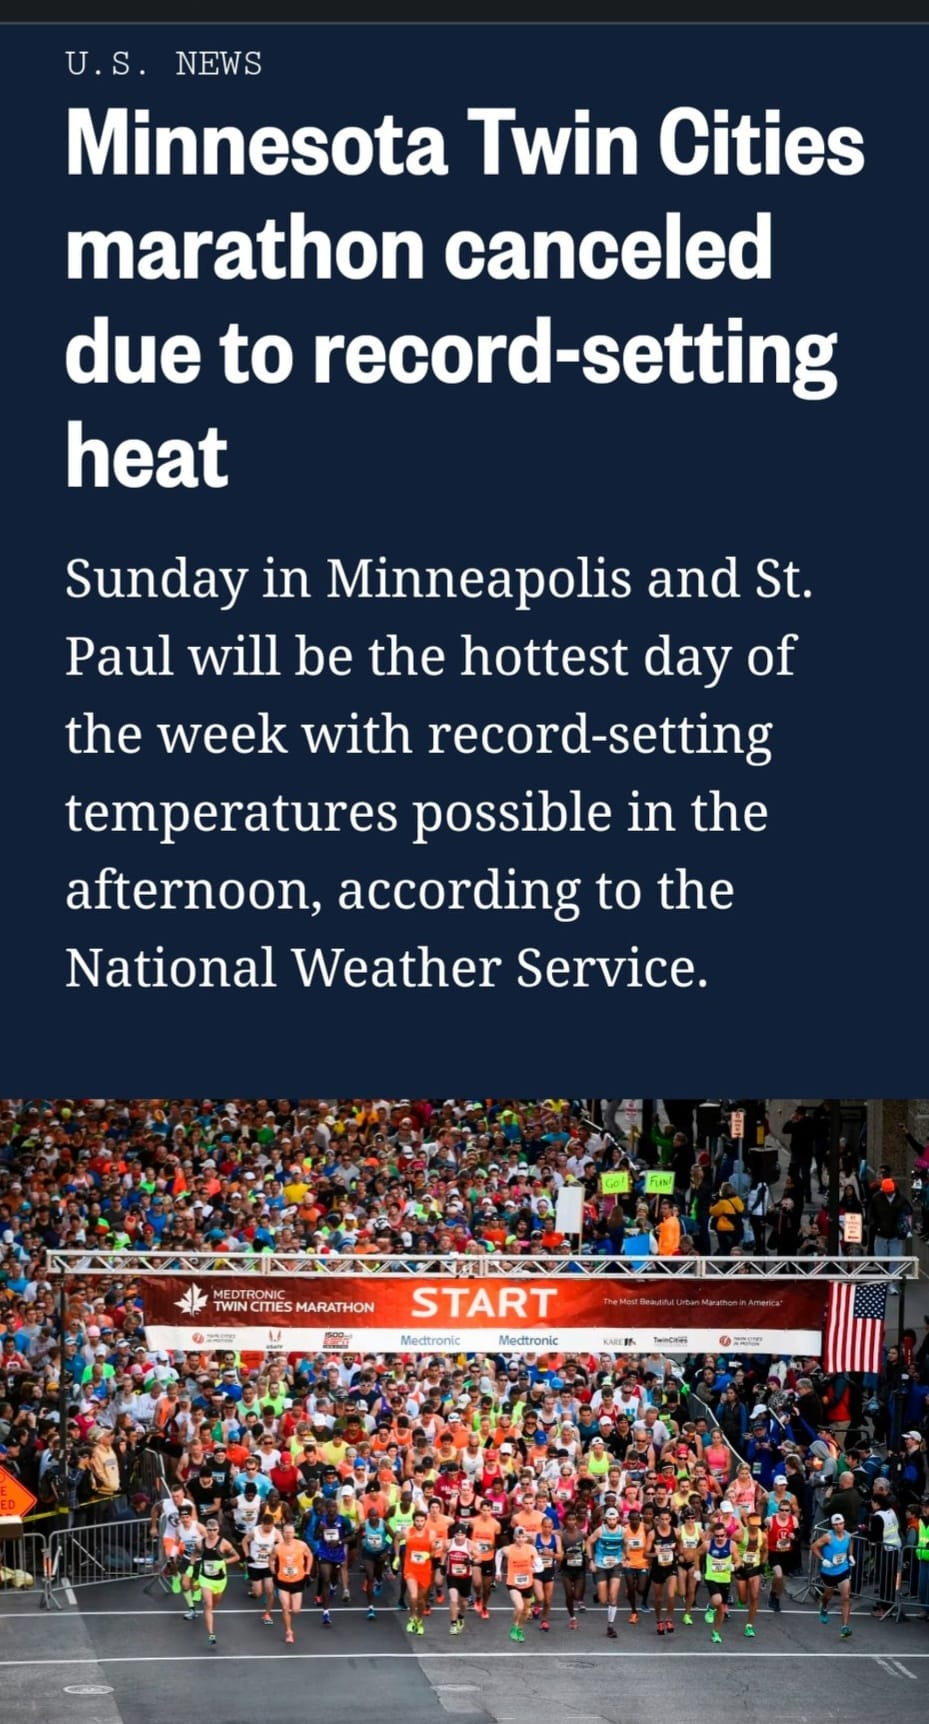 May be an image of text that says 'U.S. NEWS Minnesota Twin Cities marathon canceled due to record-setting heat Sunday in Minneapolis and St. Paul will be the hottest day of the week with record-setting temperatures possible in the afternoon, according to the National Weather Service. F ÛWE MARATHON START Sote Medtronic'